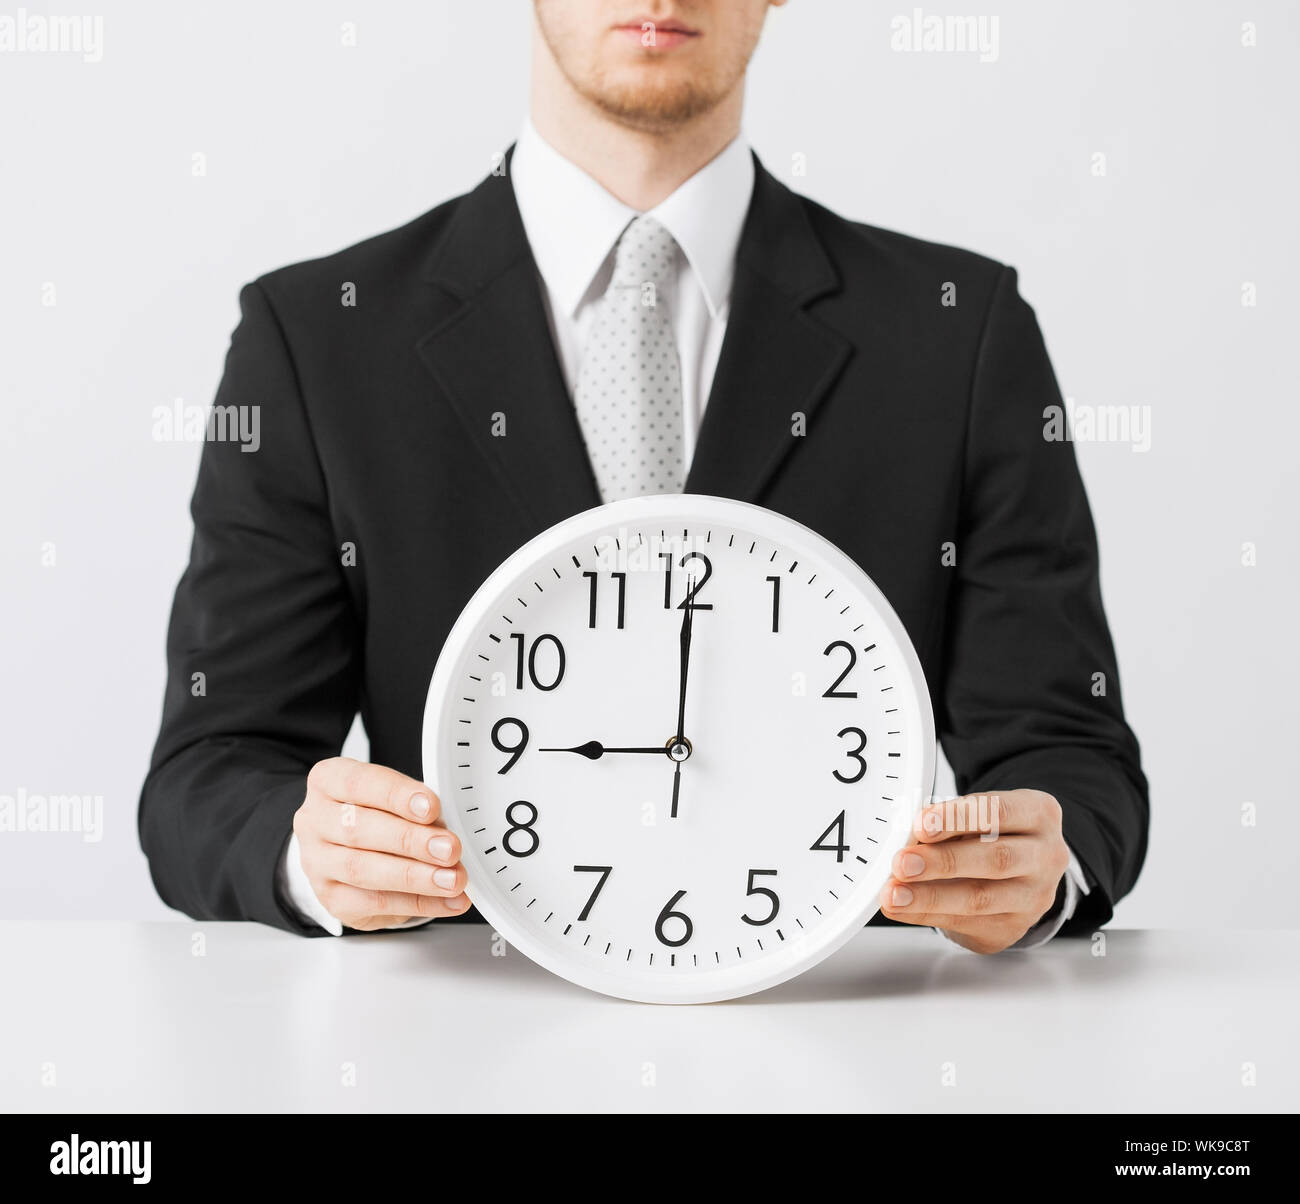 man with wall clock Stock Photo